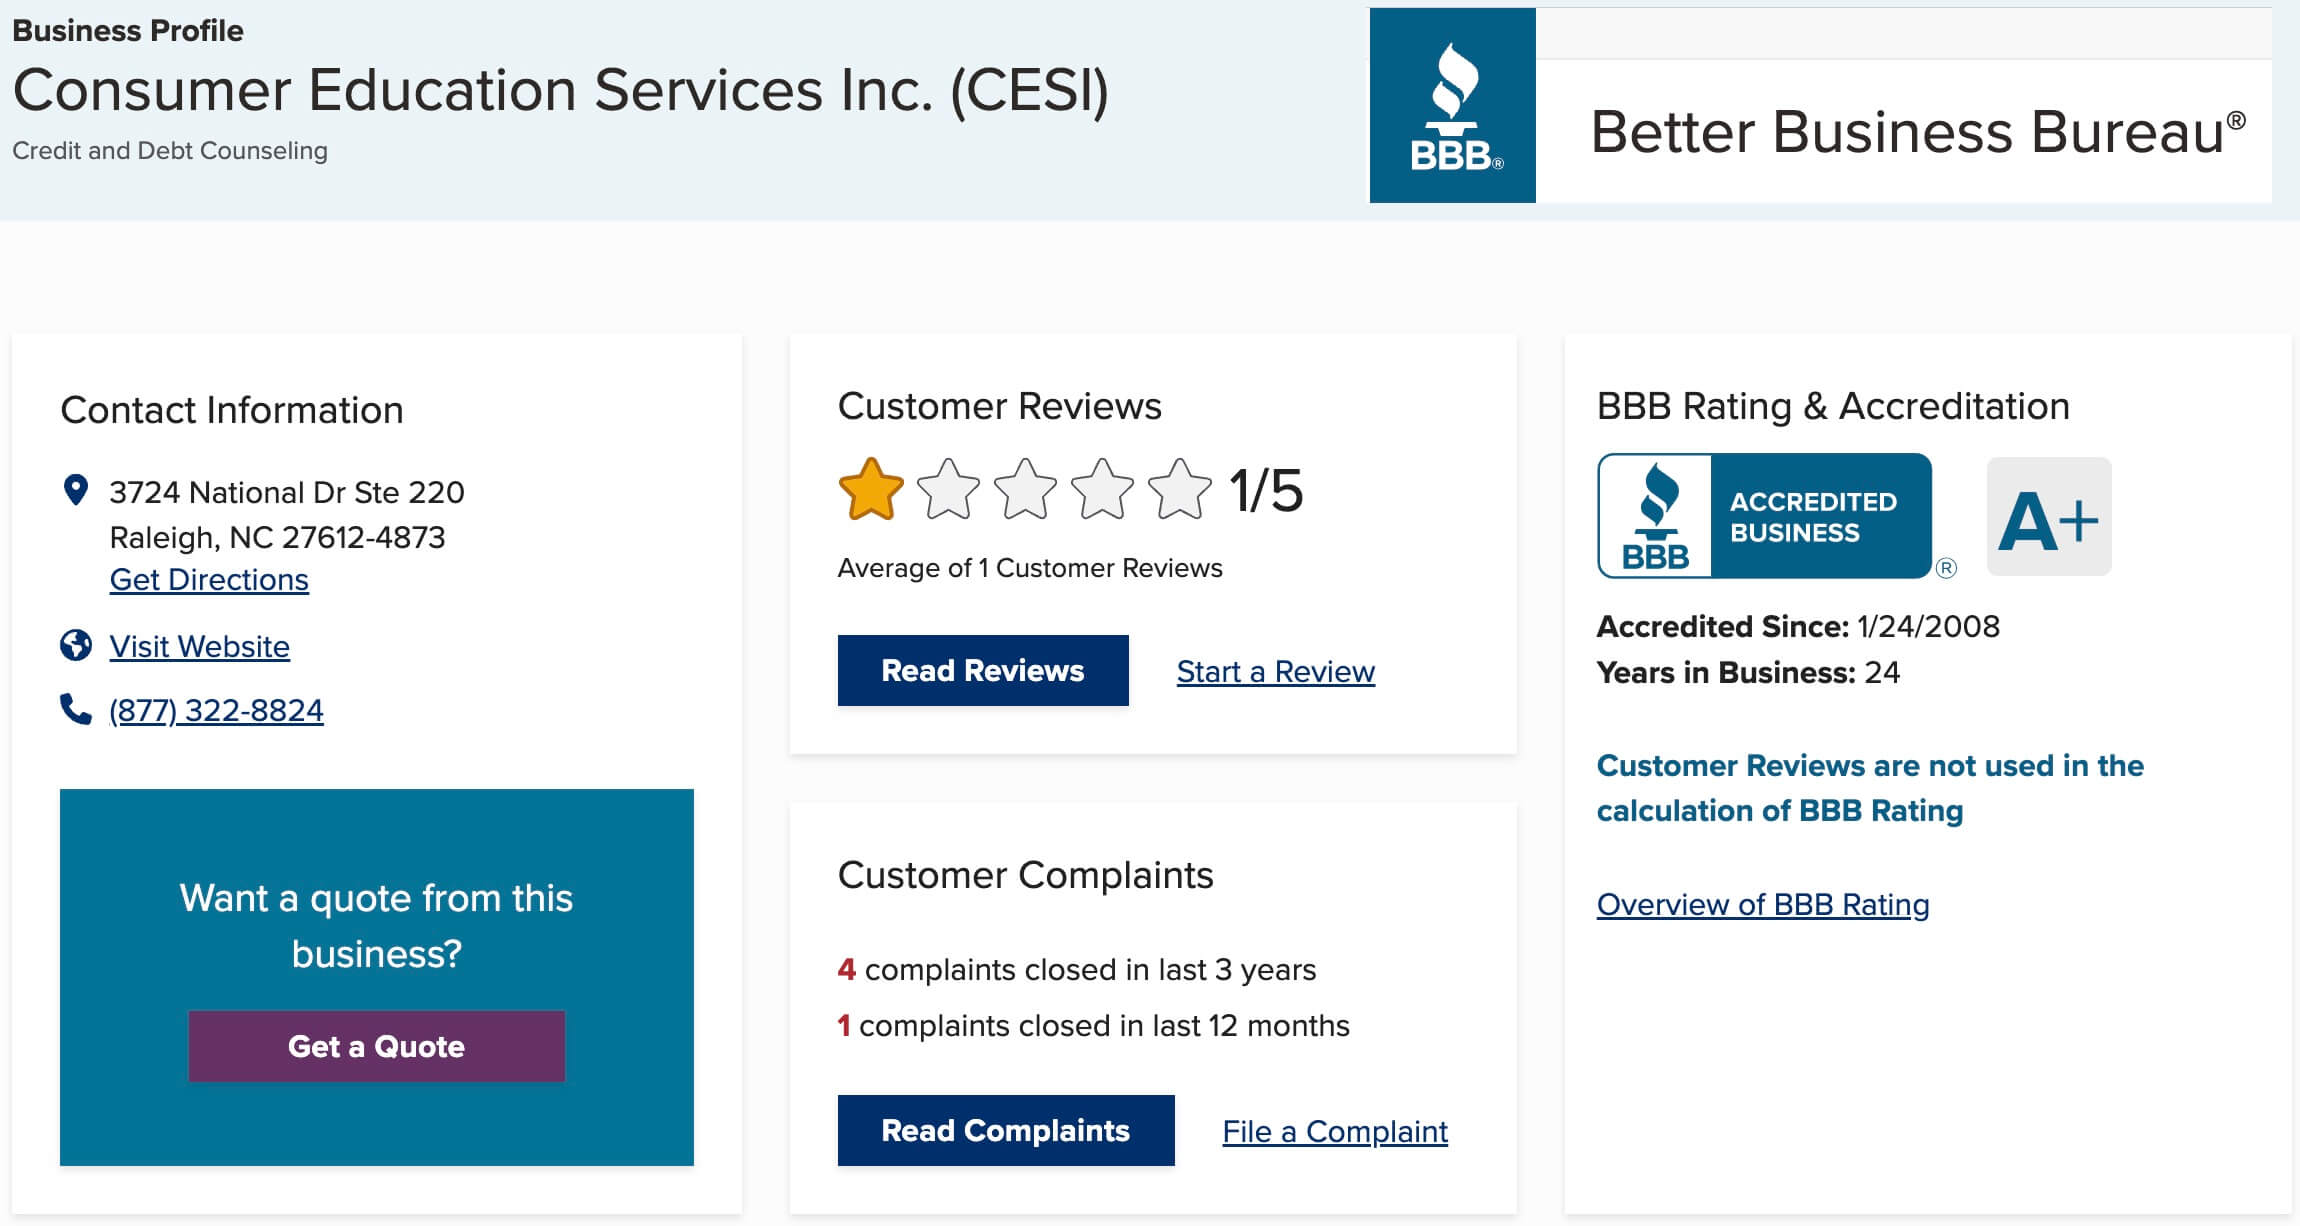 Consumer Education Services, Inc (CESI) Reviews at BBB 